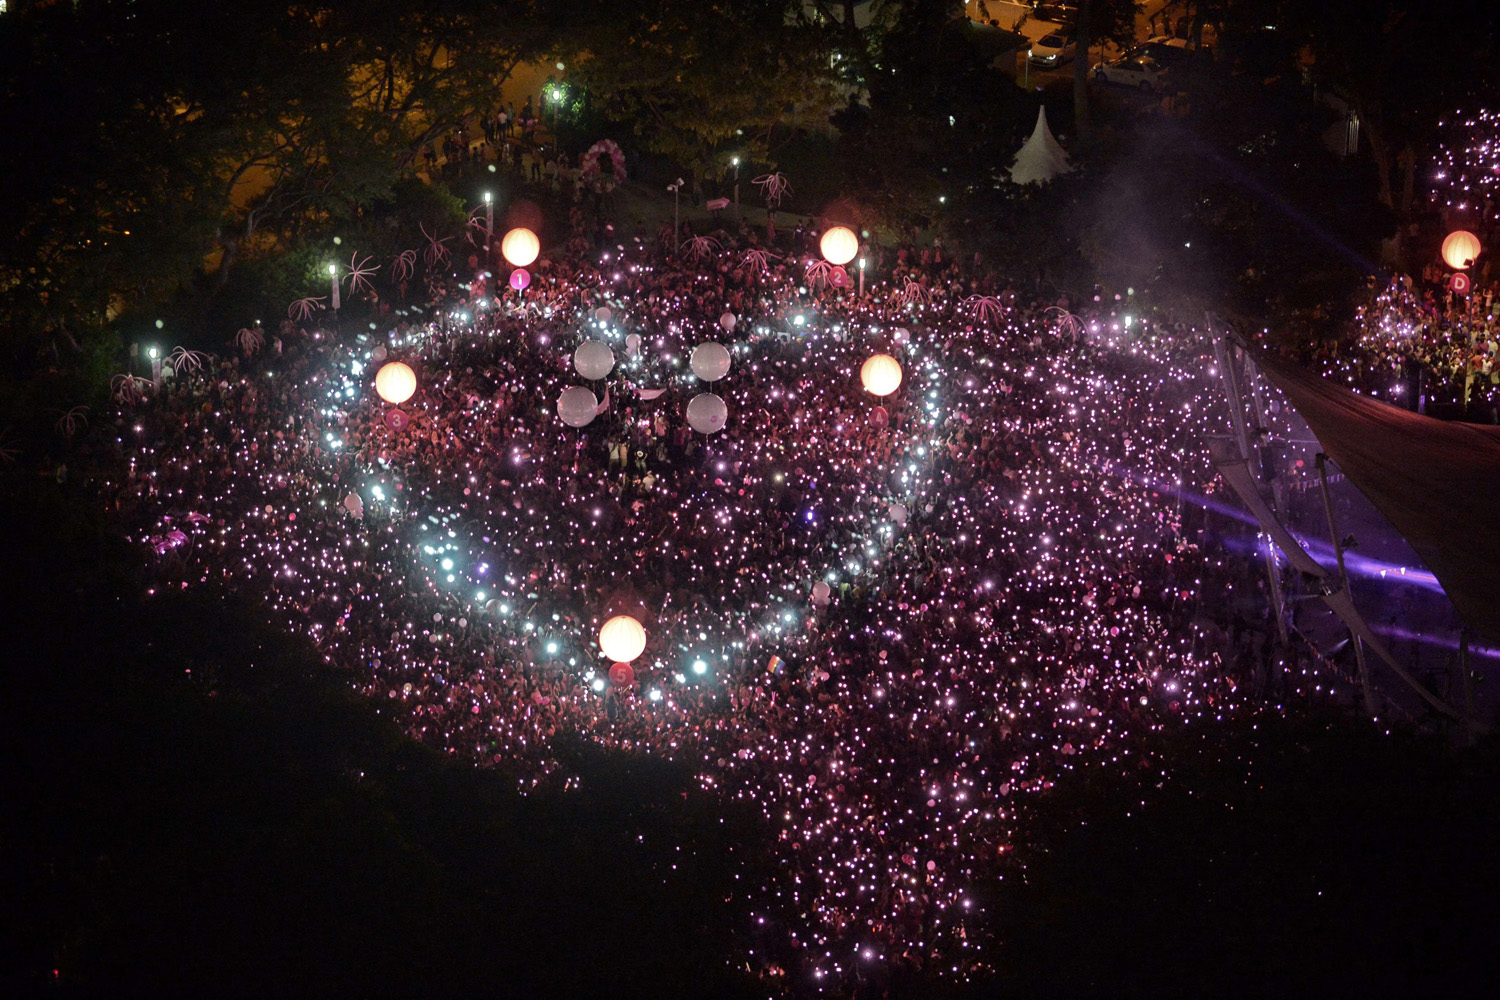 Jun. 28, 2014. Suporters form a giant pink dot at  Speakers' Corner  in Singapore. A gay rights rally was set to kick off in Singapore June 28, with organizers expecting tens of thousands of people to celebrate sexual diversity in the city-state despite fierce opposition from religious conservatives.